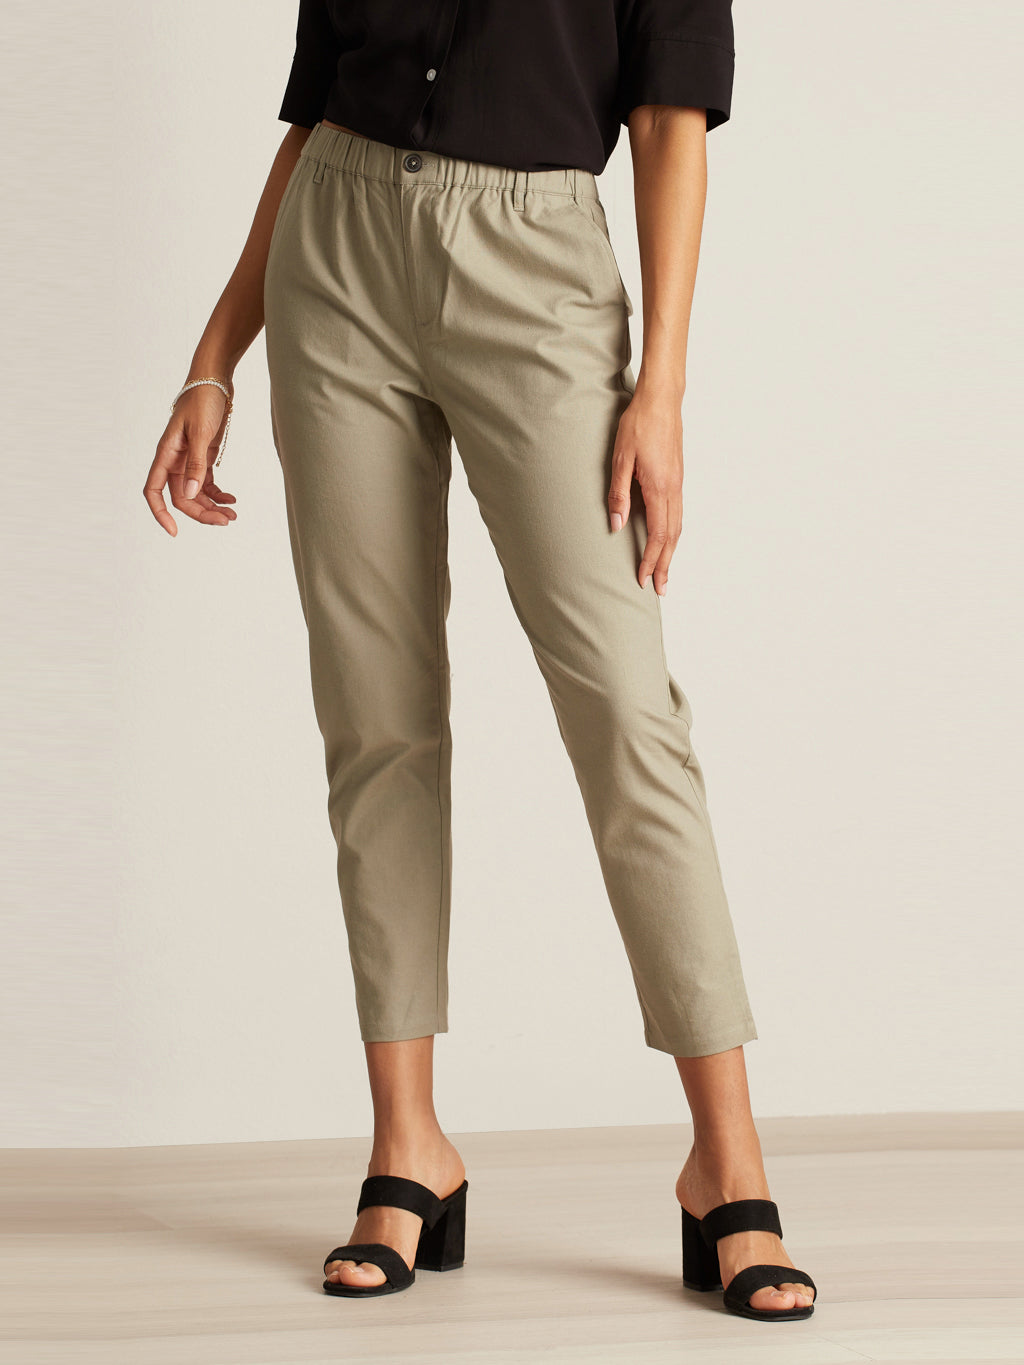 Straight semi-fitted pant